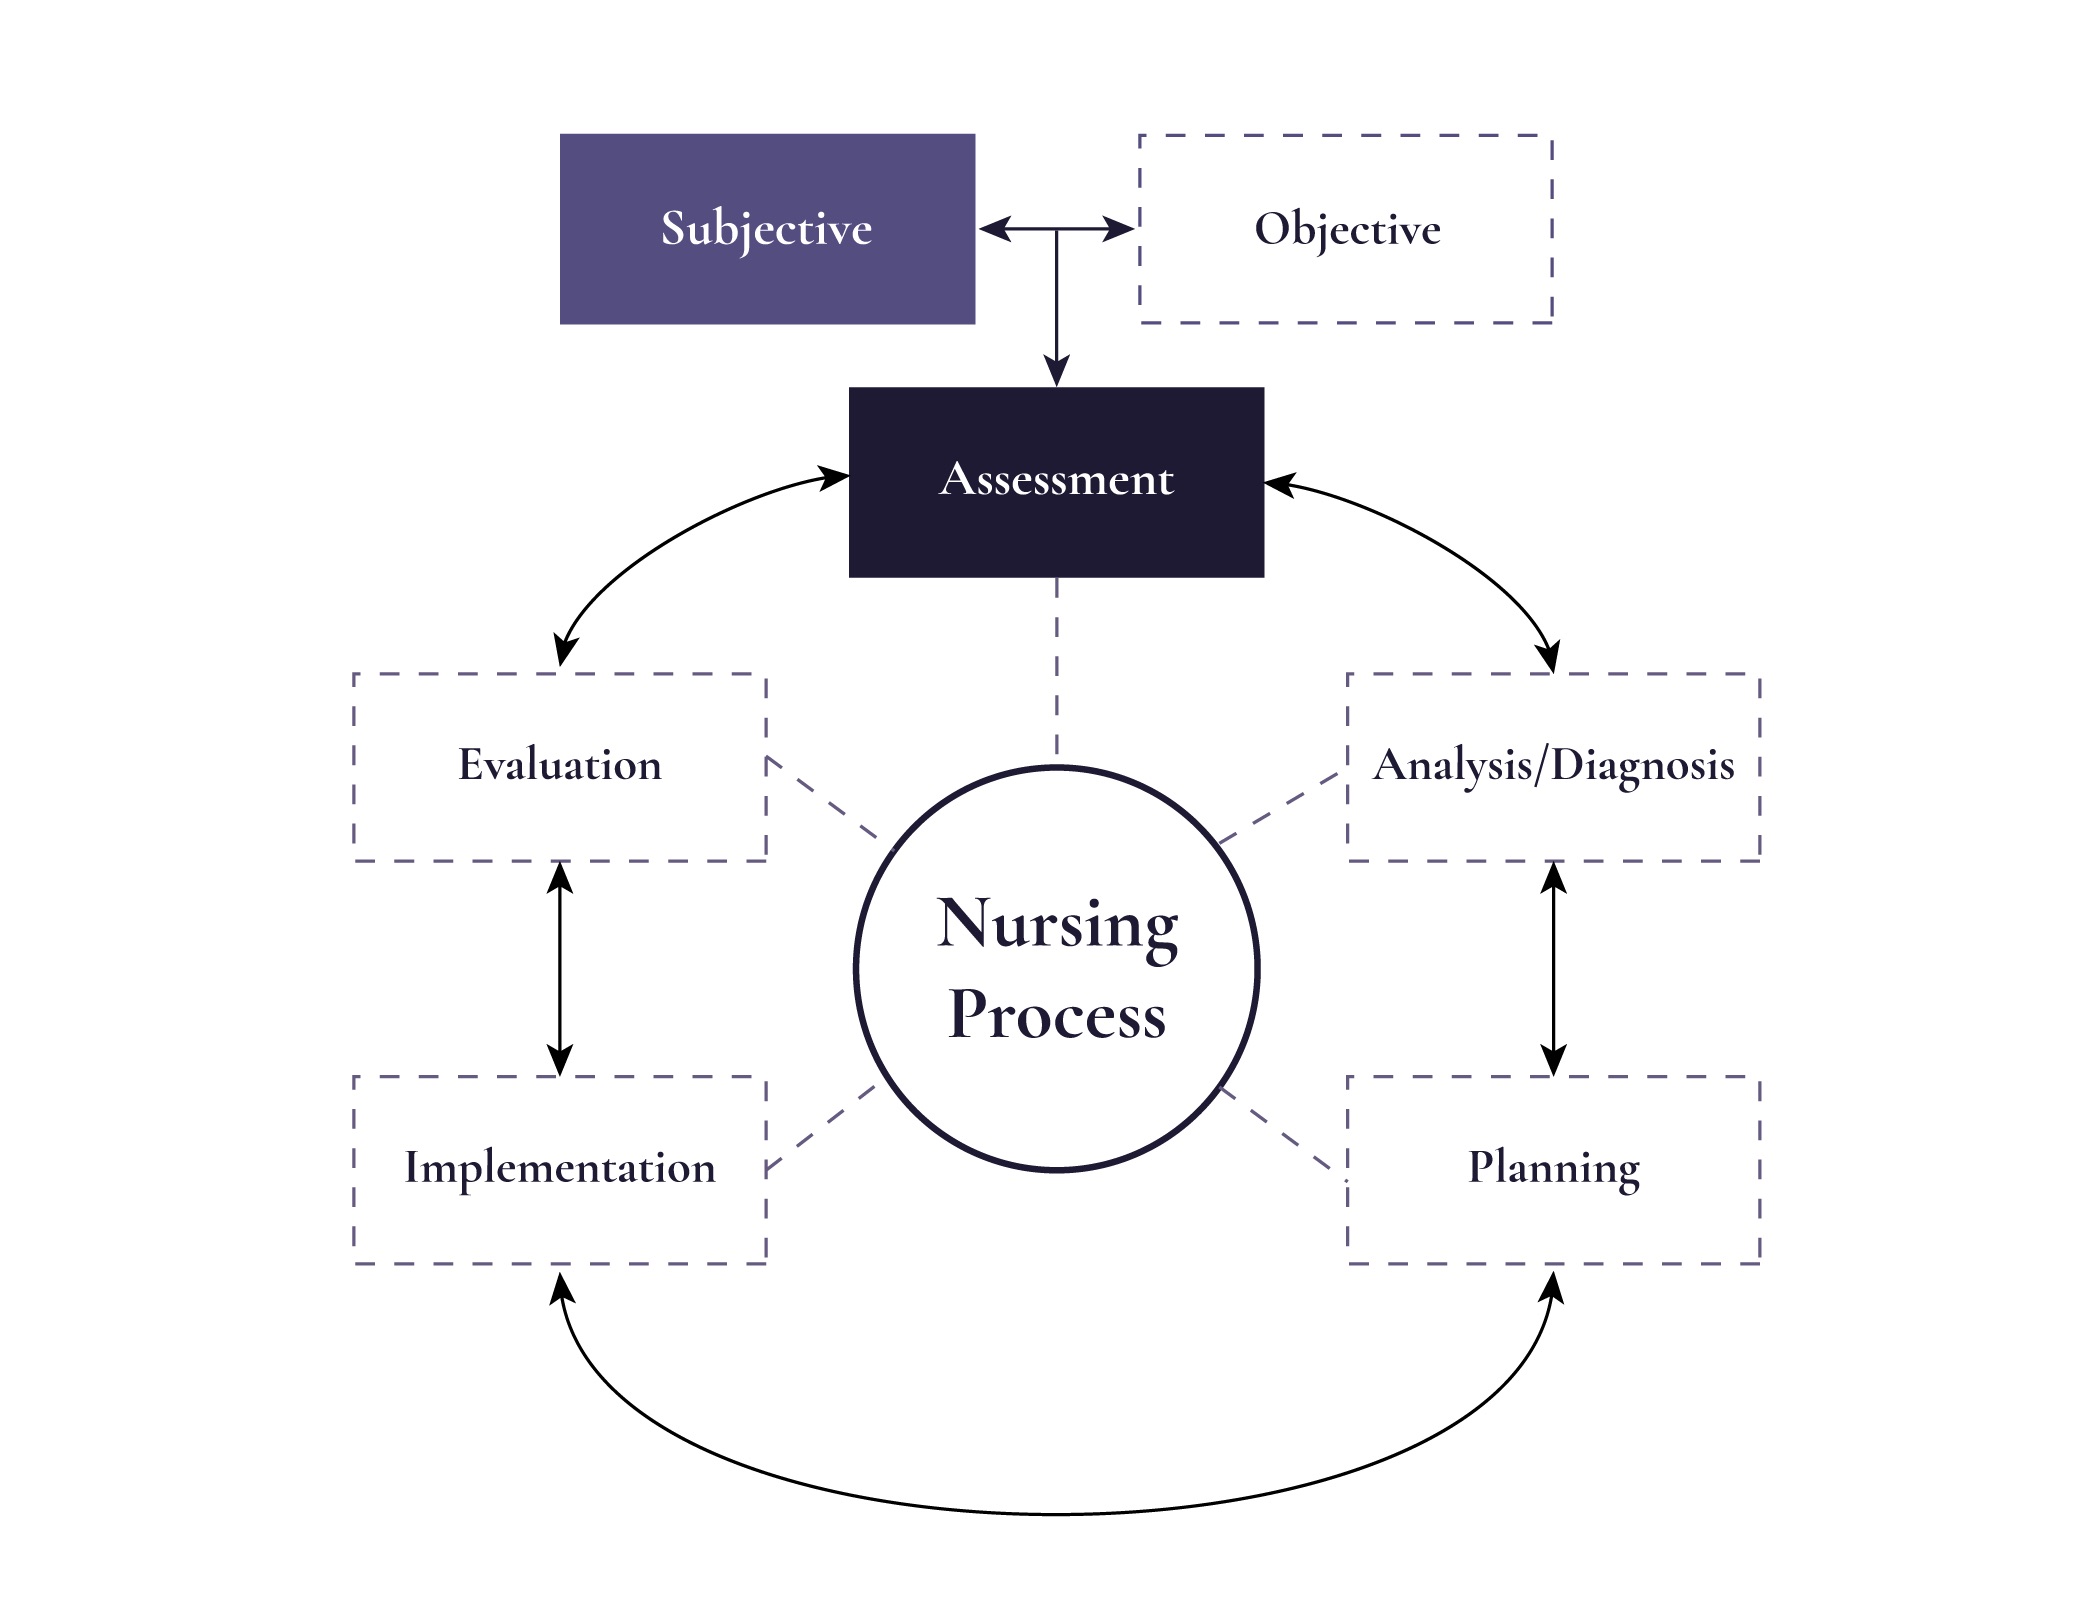 Highlights where the subjective health assessment sits within the nursing process. The nursing process includes Evaluation, Assessment, Analysis/Diagnosis, Planning, and Implementation